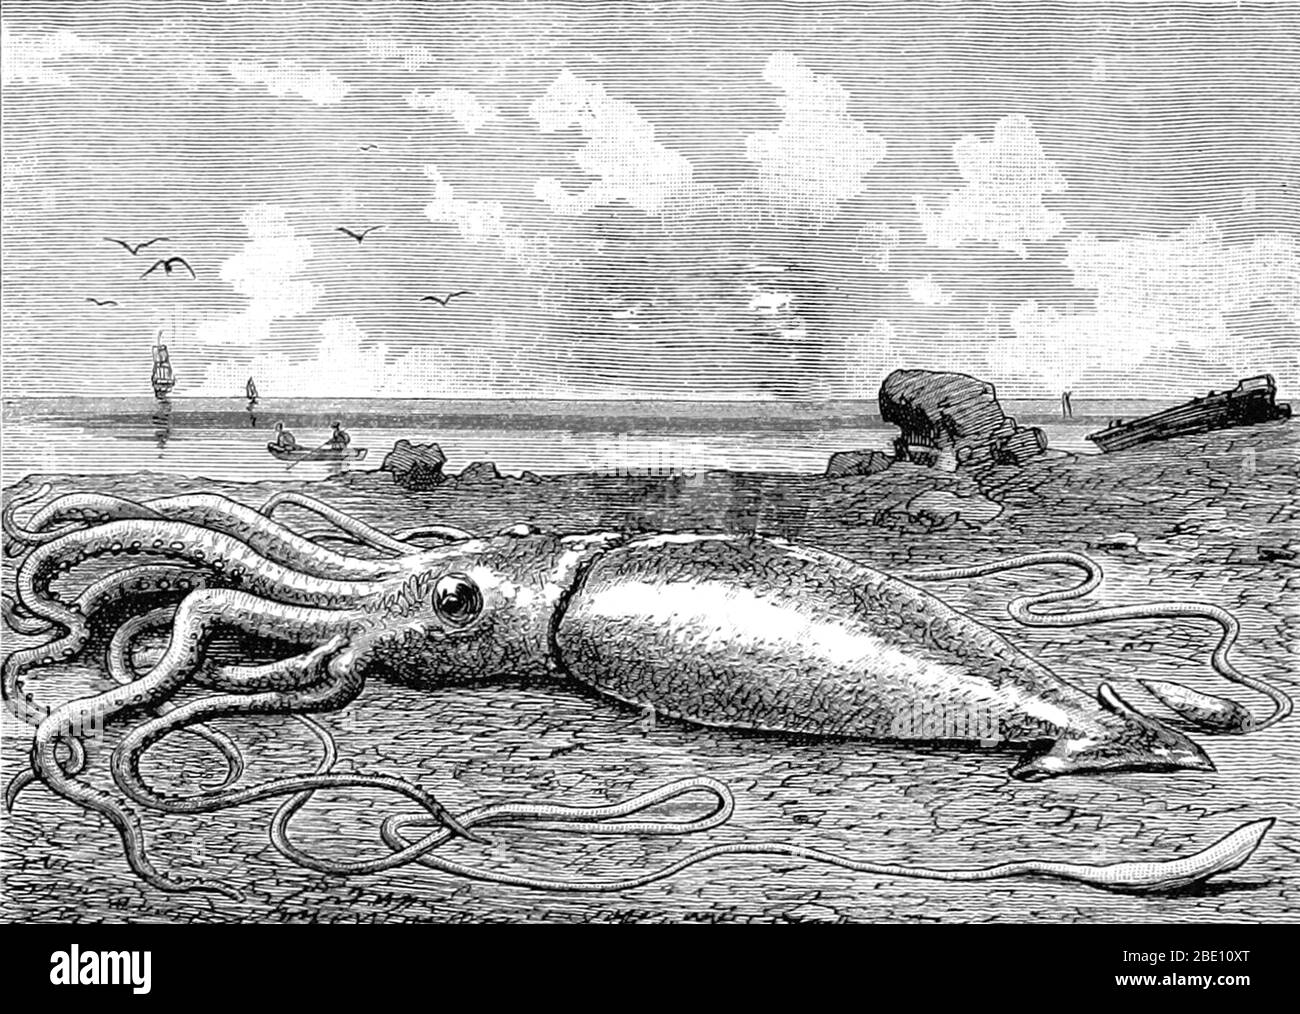 The giant squid (genus Architeuthis) is a deep-ocean dwelling squid in the family Architeuthidae. Giant squid can grow to a tremendous size due to deep-sea gigantism: recent estimates put the maximum size at 43 feet for females and 33 feet for males from the posterior fins to the tip of the two long tentacles. The mantle is about 6.6 feet long (more for females, less for males), and the length of the squid excluding its tentacles (but including head and arms) rarely exceeds 16 feet. Claims of specimens measuring 66 feet or more have not been scientifically documented. Tales of giant squid have Stock Photo